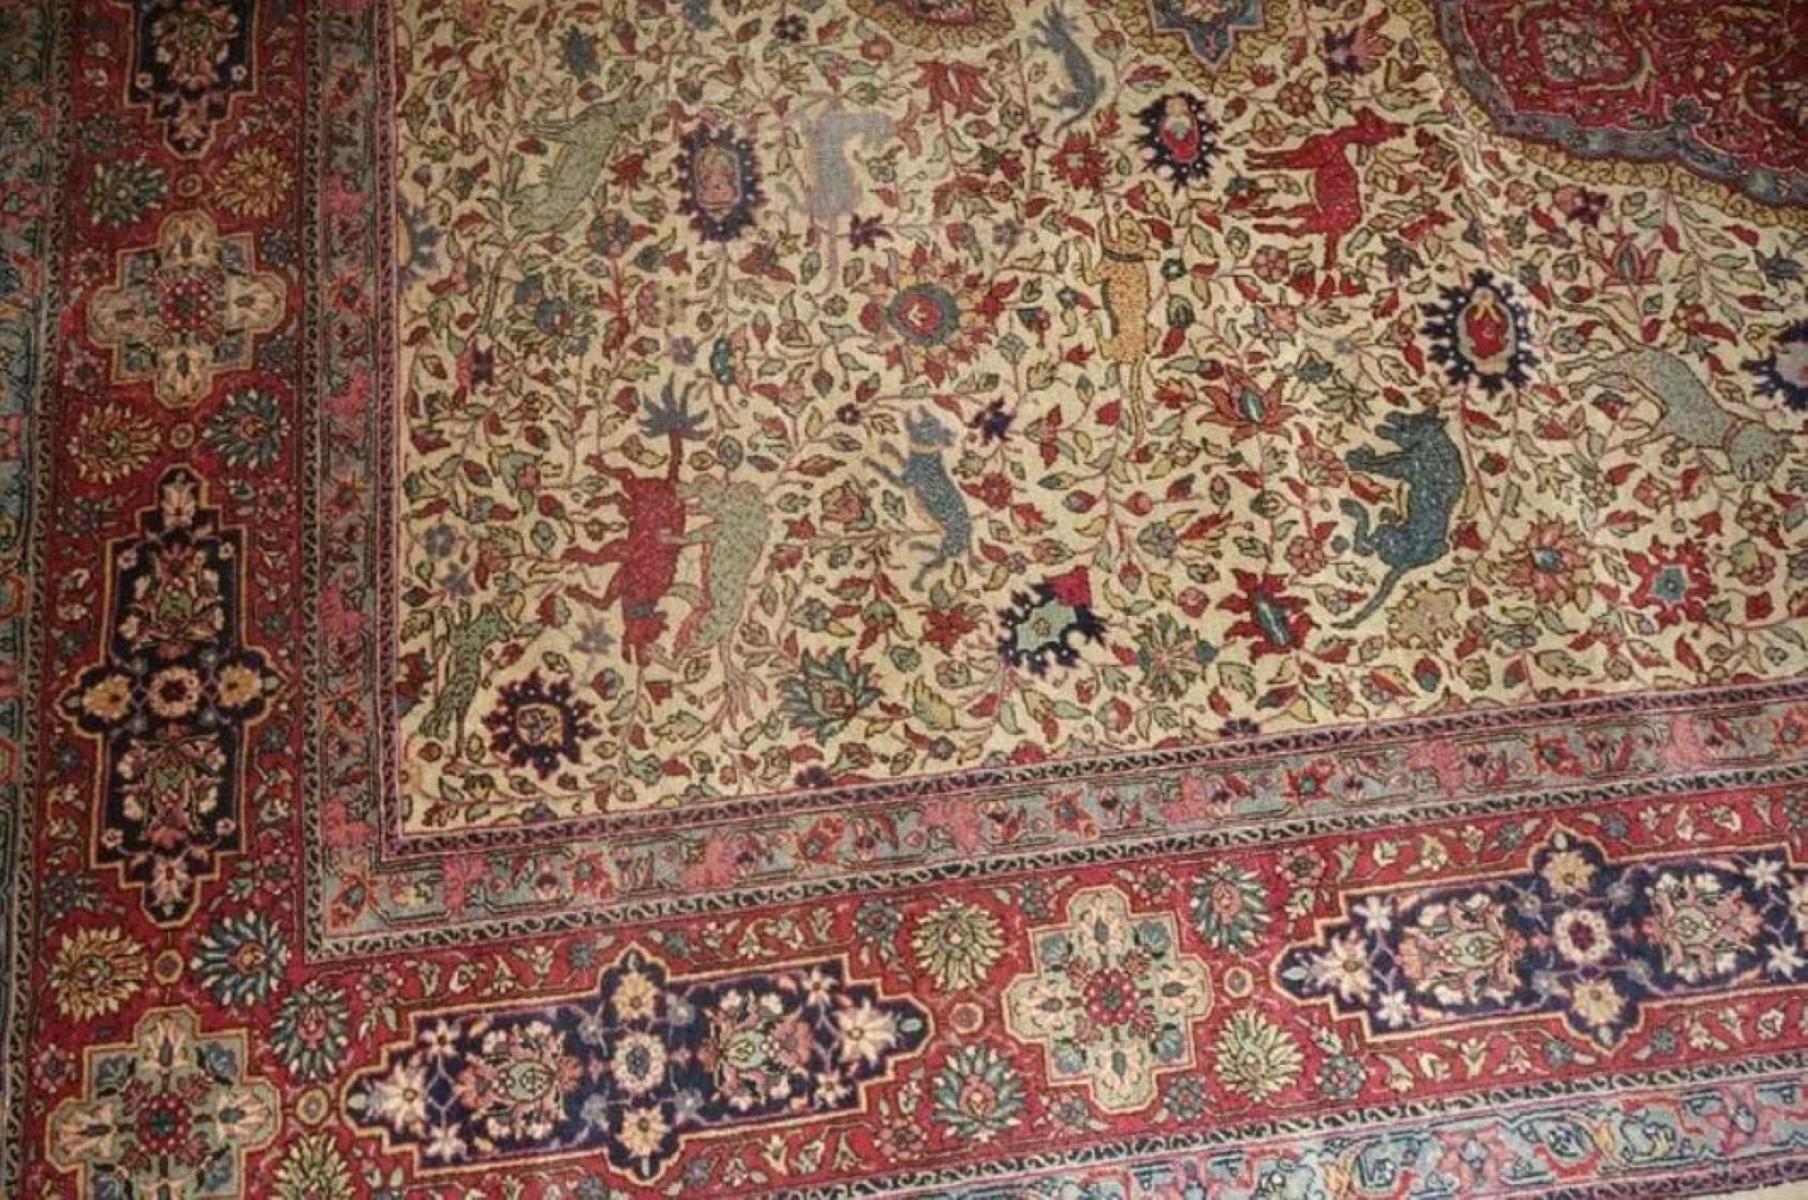 Very fine Persian Rug Tabriz 500 Knots per inch, Size 9 x 12 Antique, Wool and Silk. Around 7,500,000 knots tied by hand one by one. It takes 4 years to complete this piece of art.